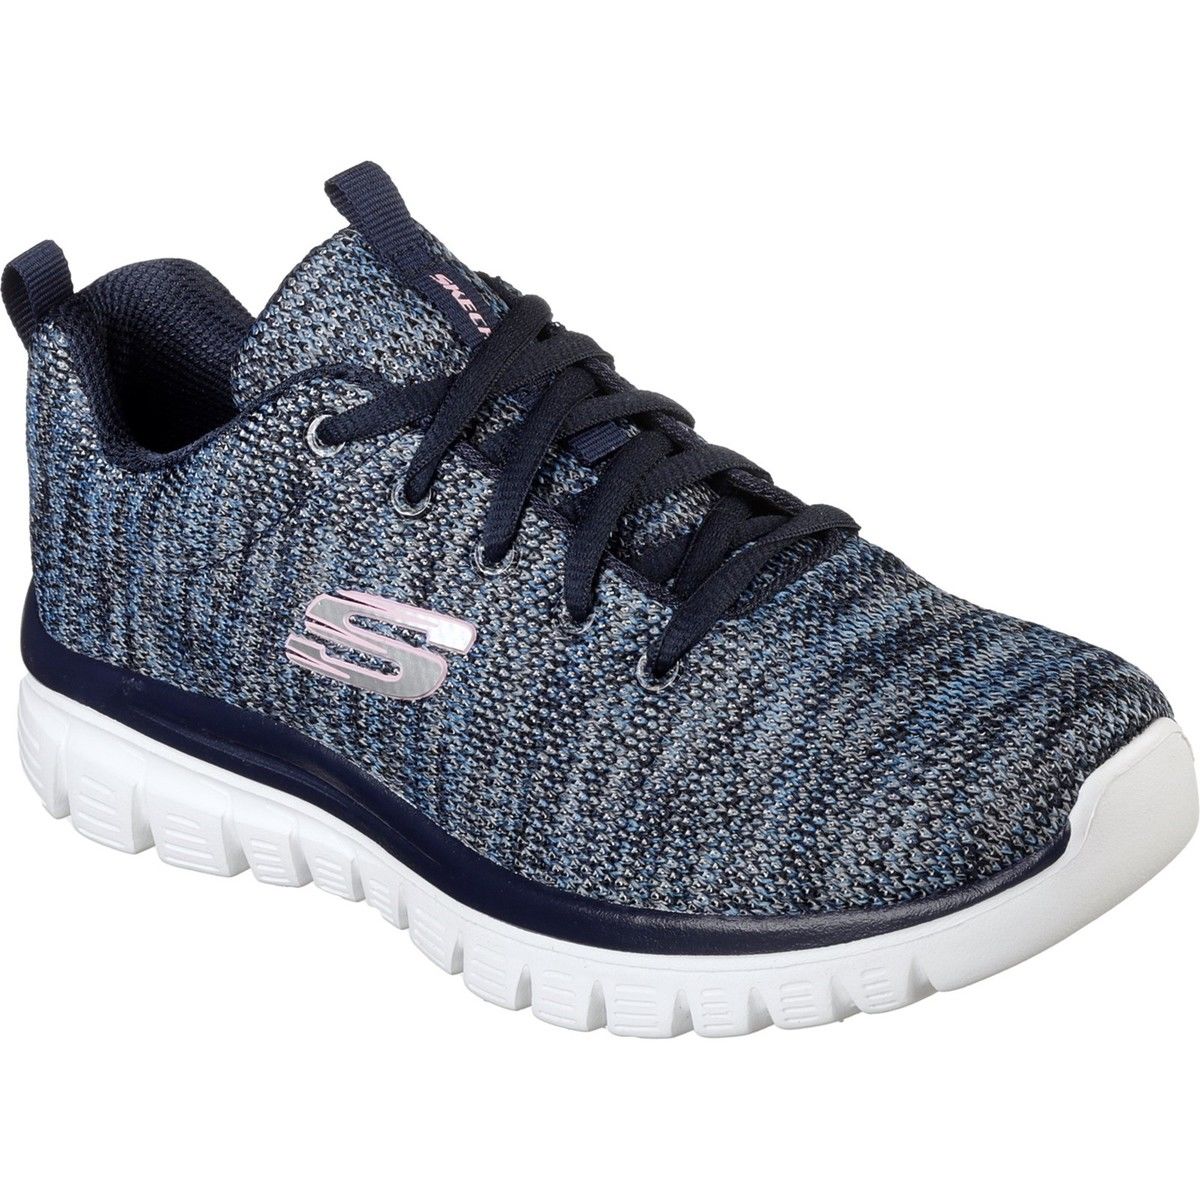 Skechers Graceful Twisted Fortune NVBL Navy Blue Womens trainers in a Plain Textile in Size 4